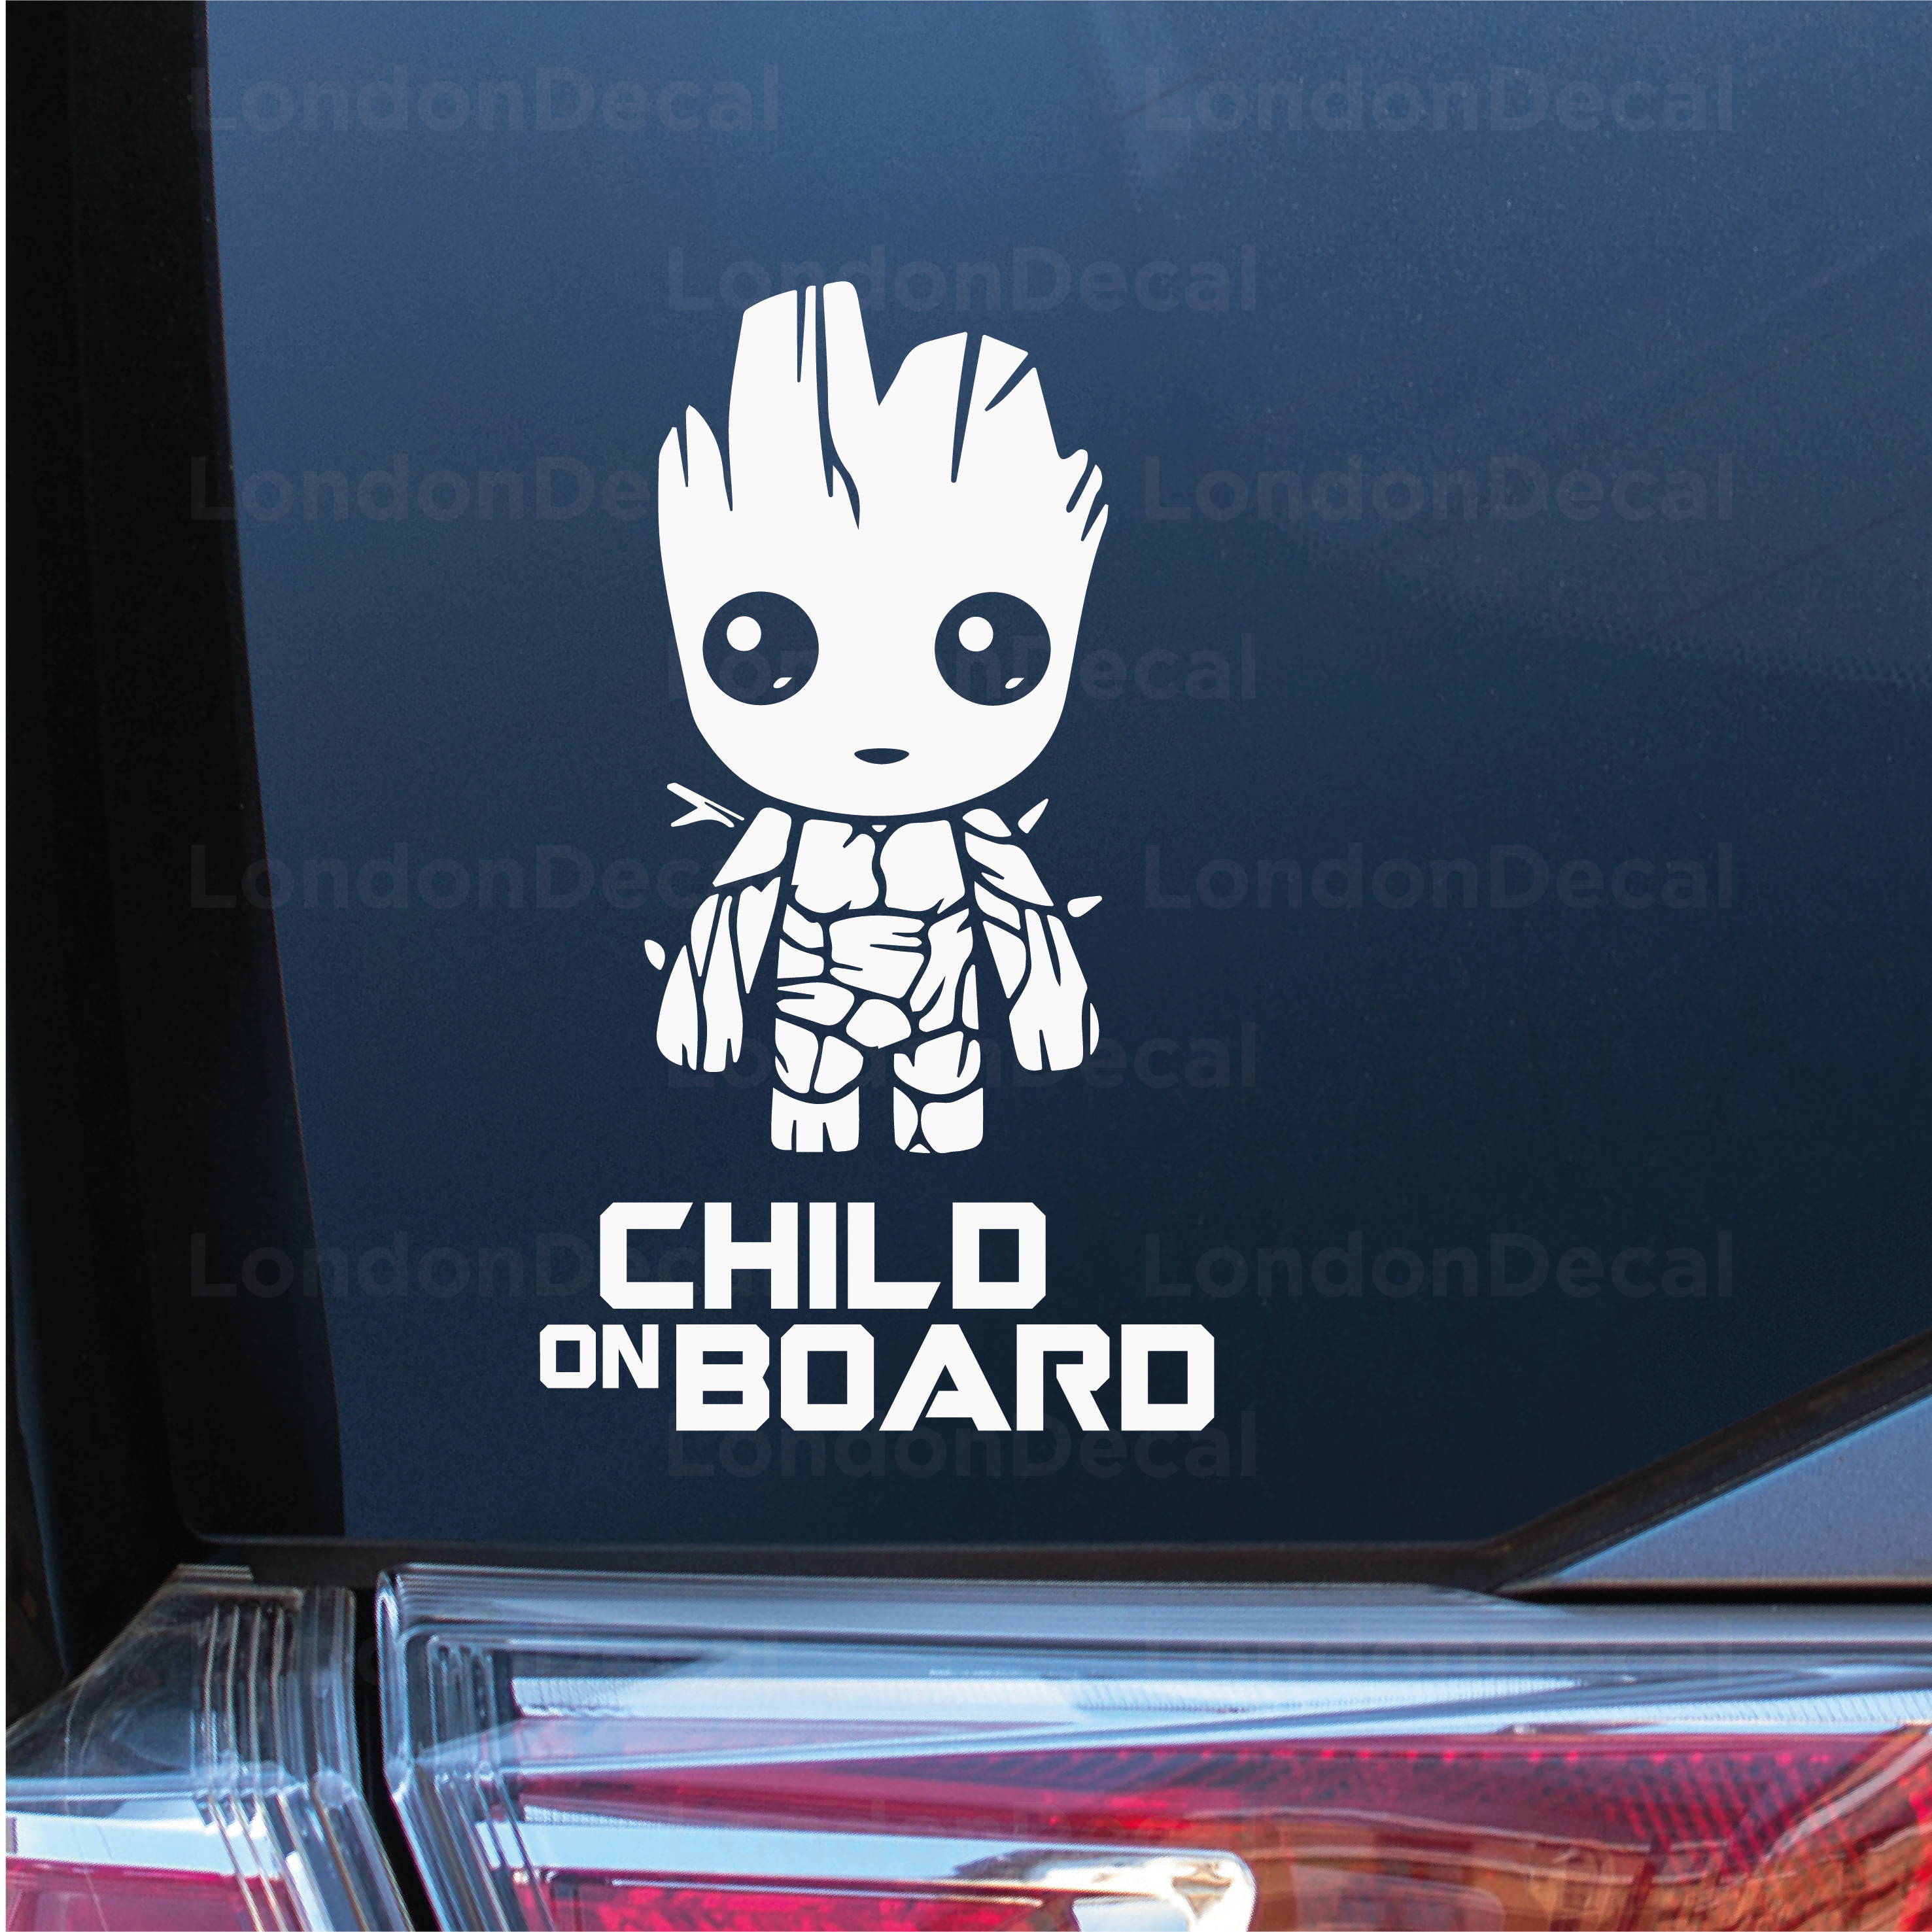 saai band Ontembare Child On Board Car Vinyl Decal Sticker, Baby Groot Inverted - LondonDecal